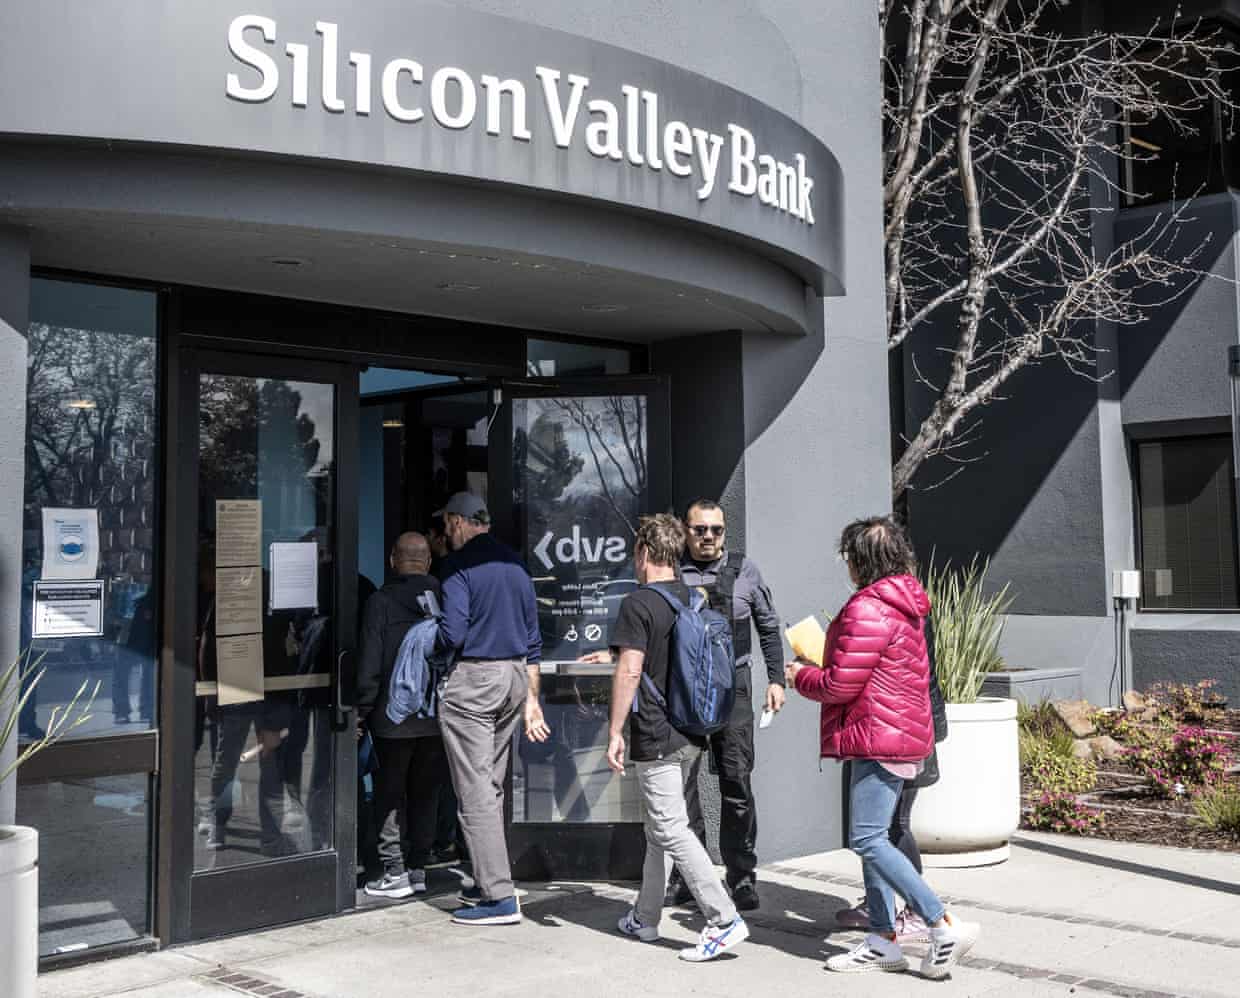 Silicon Valley Bank: parent company, CEO and CFO sued amid market turmoil (theguardian.com)